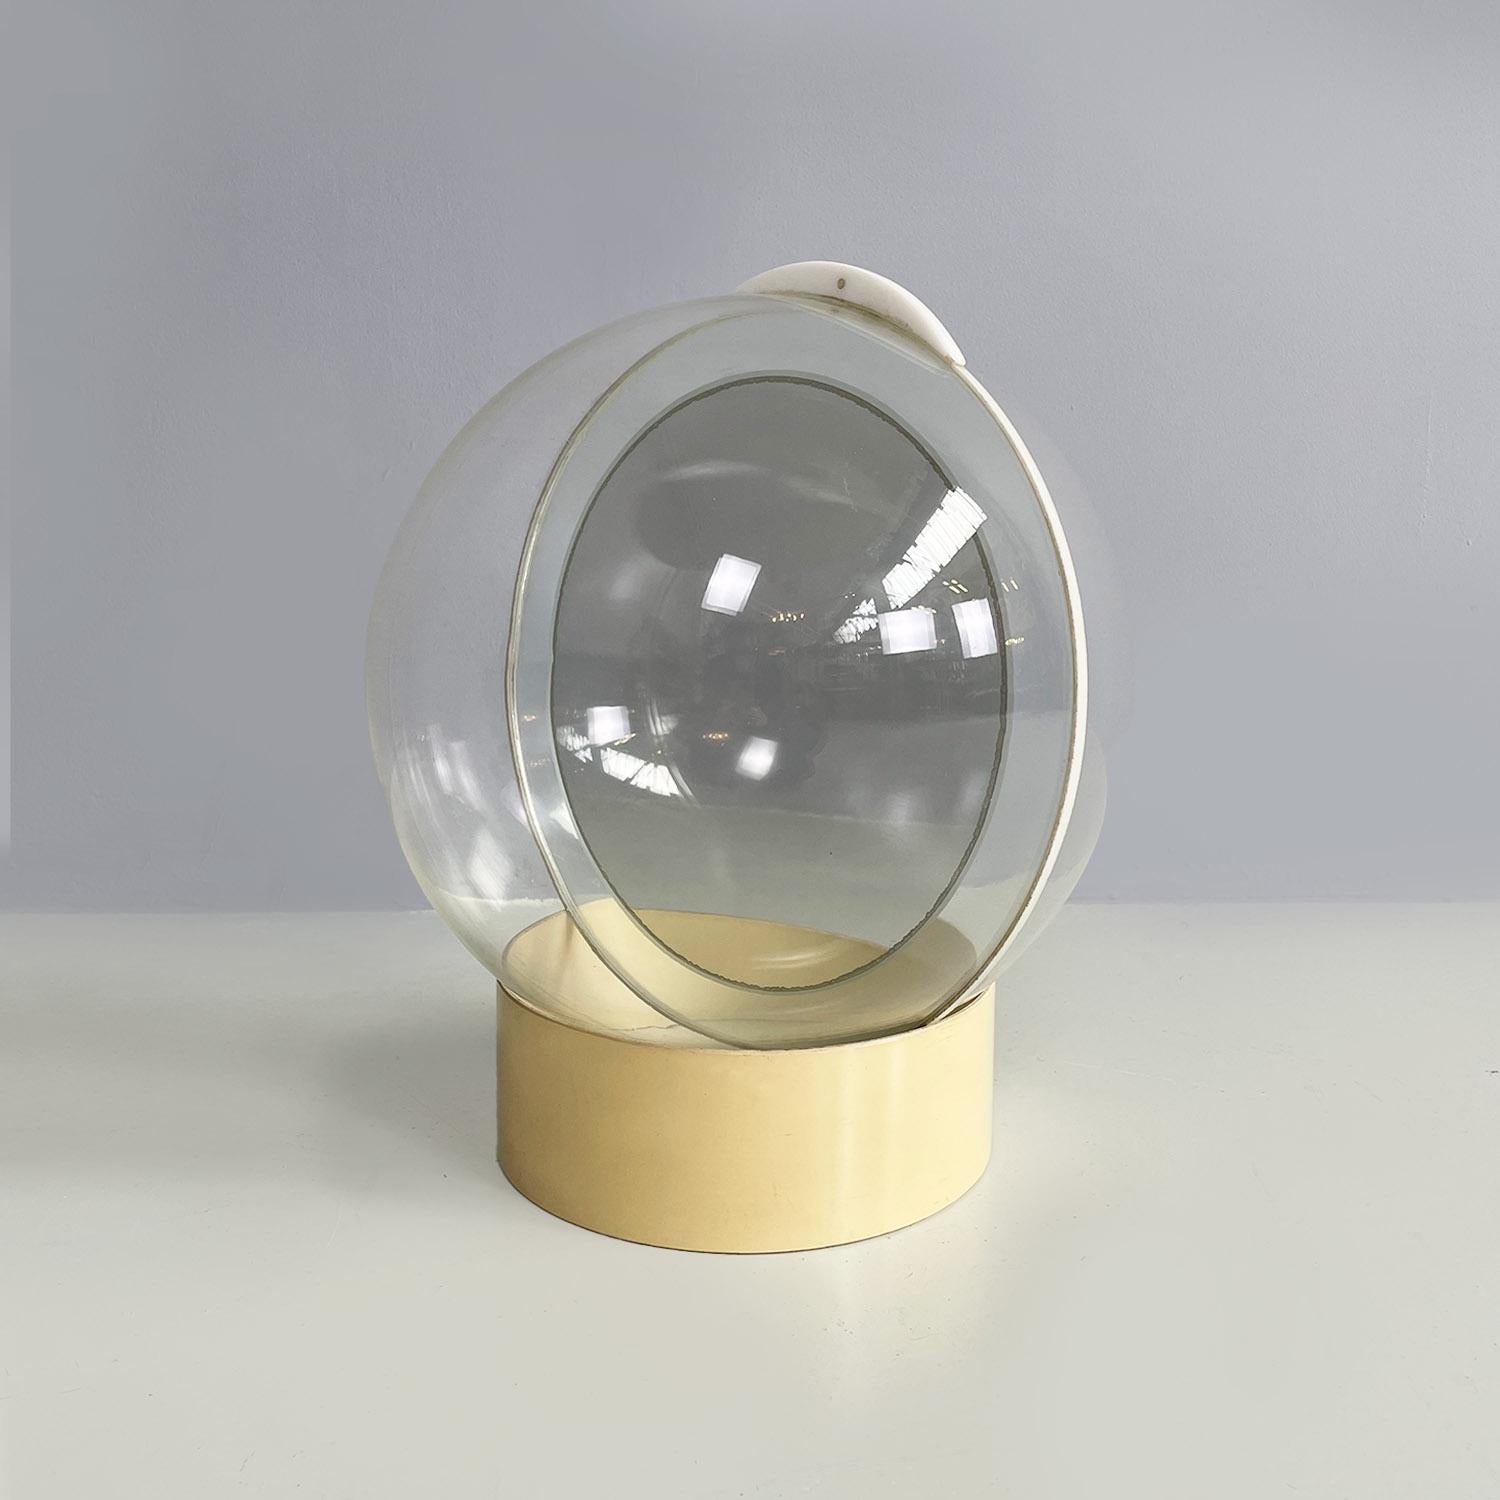 Table mirror model 4720/S, composed of two parts, a cylindrical plastic base which has slightly yellowed over time and a transparent plexiglass sphere, with the round mirror inside, adjustable via a white plastic handle.
Produced by Kartell in